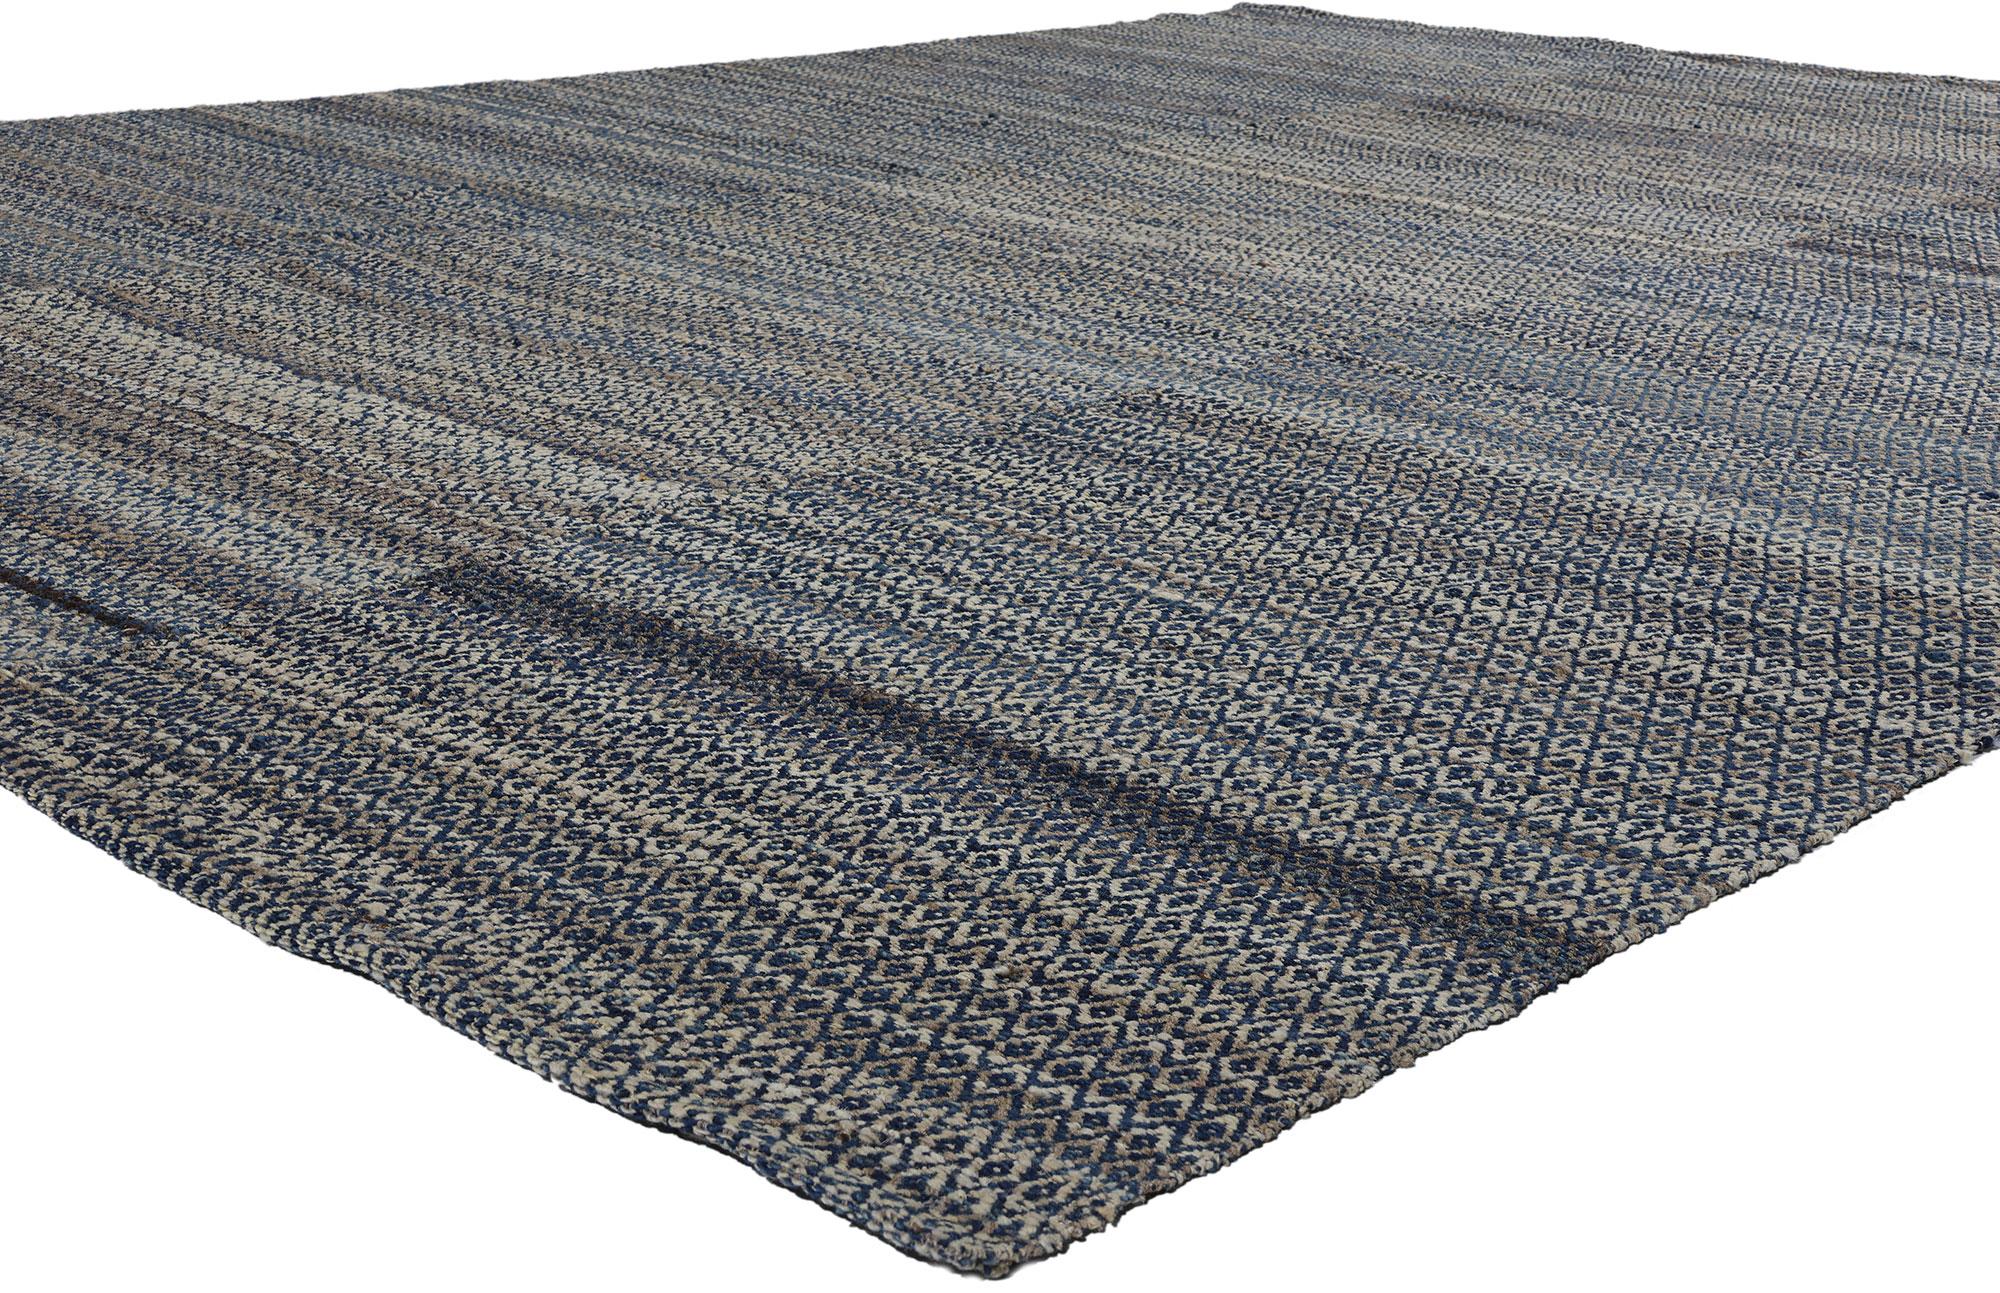 81099 Modern Blue Earth-Tone Diamond Kilim Rug, 08'08 x 11'06. Dive into coastal elegance with our handwoven modern blue earth-tone diamond kilim rug. Crafted with precision and care, this flatweave rug features a modern geometric design with